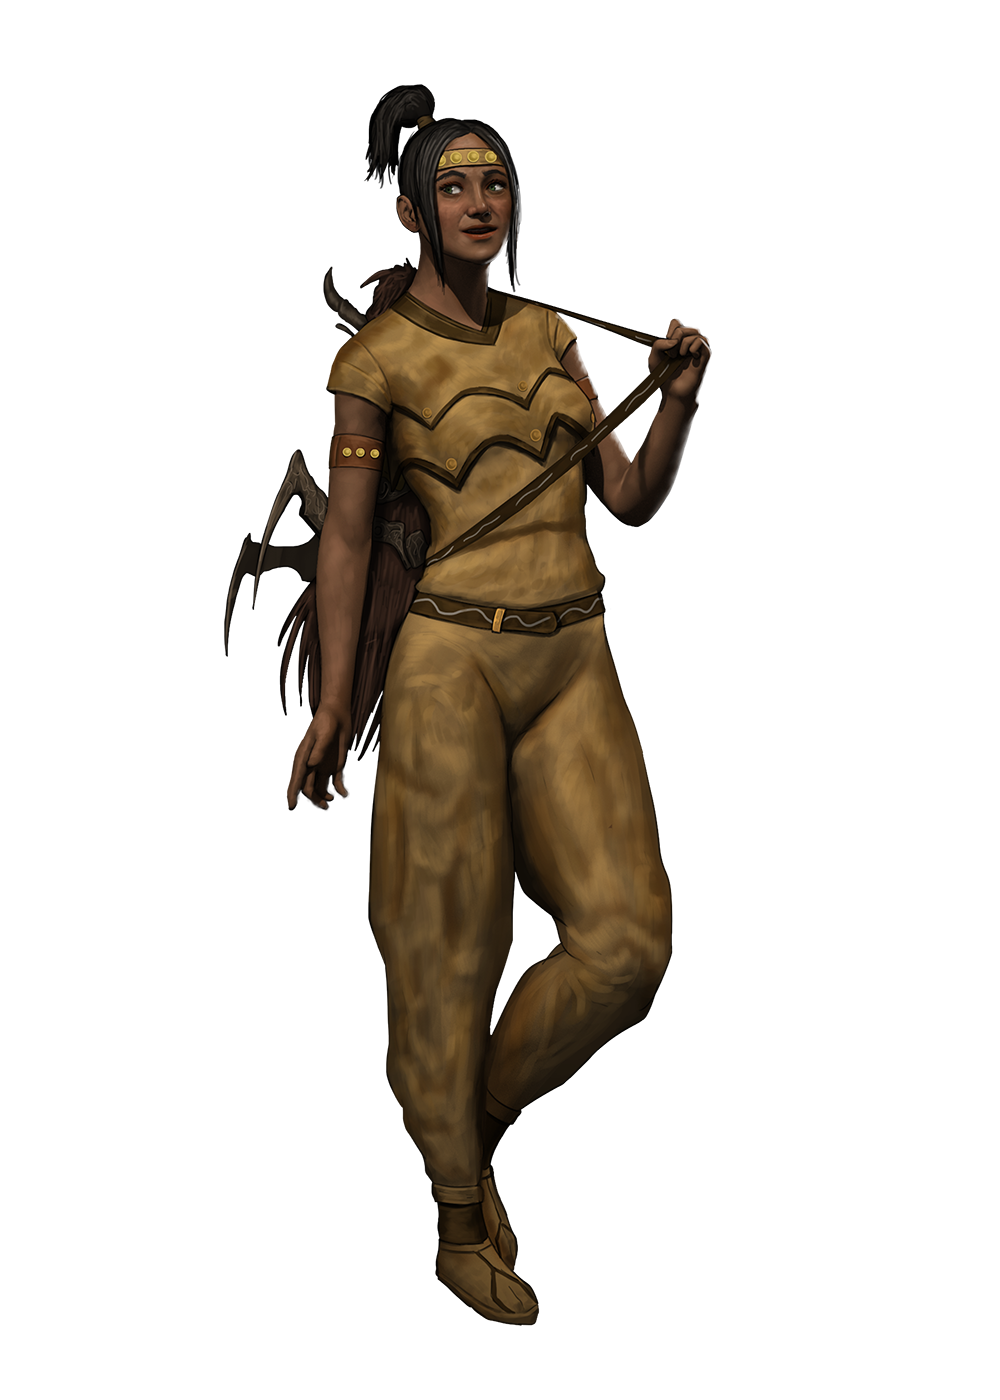 Rahaksenwe is a confident Mahwek women with dark hair that she wears in a ponytail, wearing traditional summer clothing with her spider beast gun on her back.